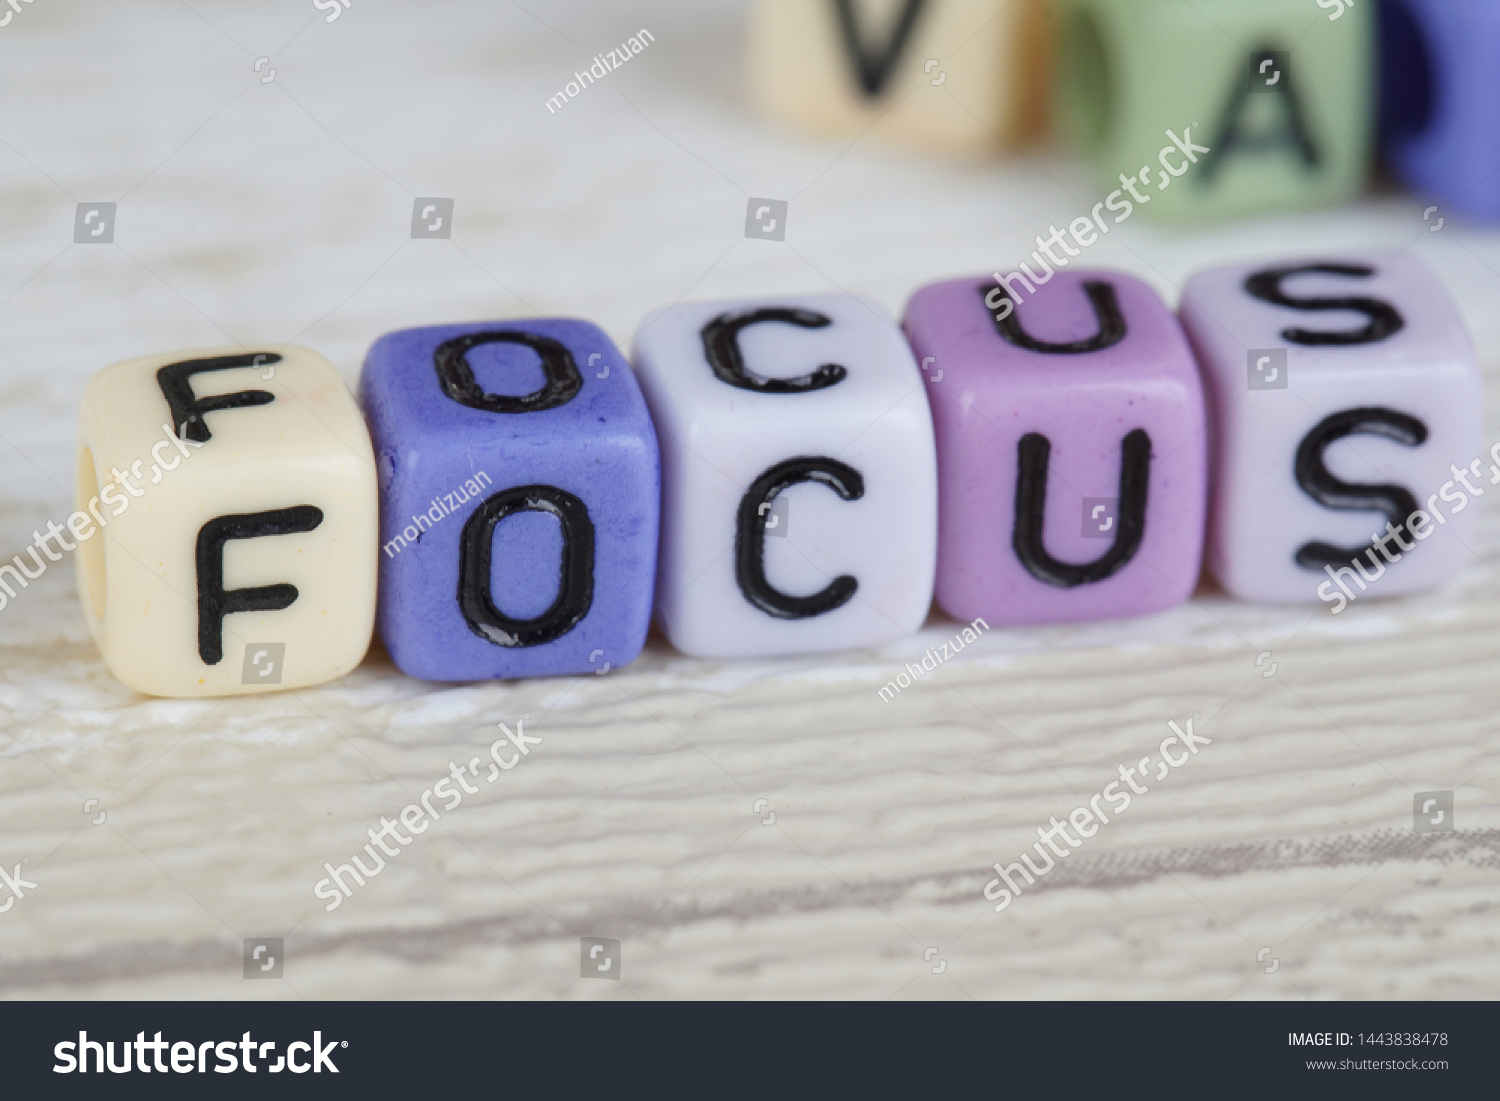 Focus wording from alphabet beads on a wooden surface. selective focus #1443838478